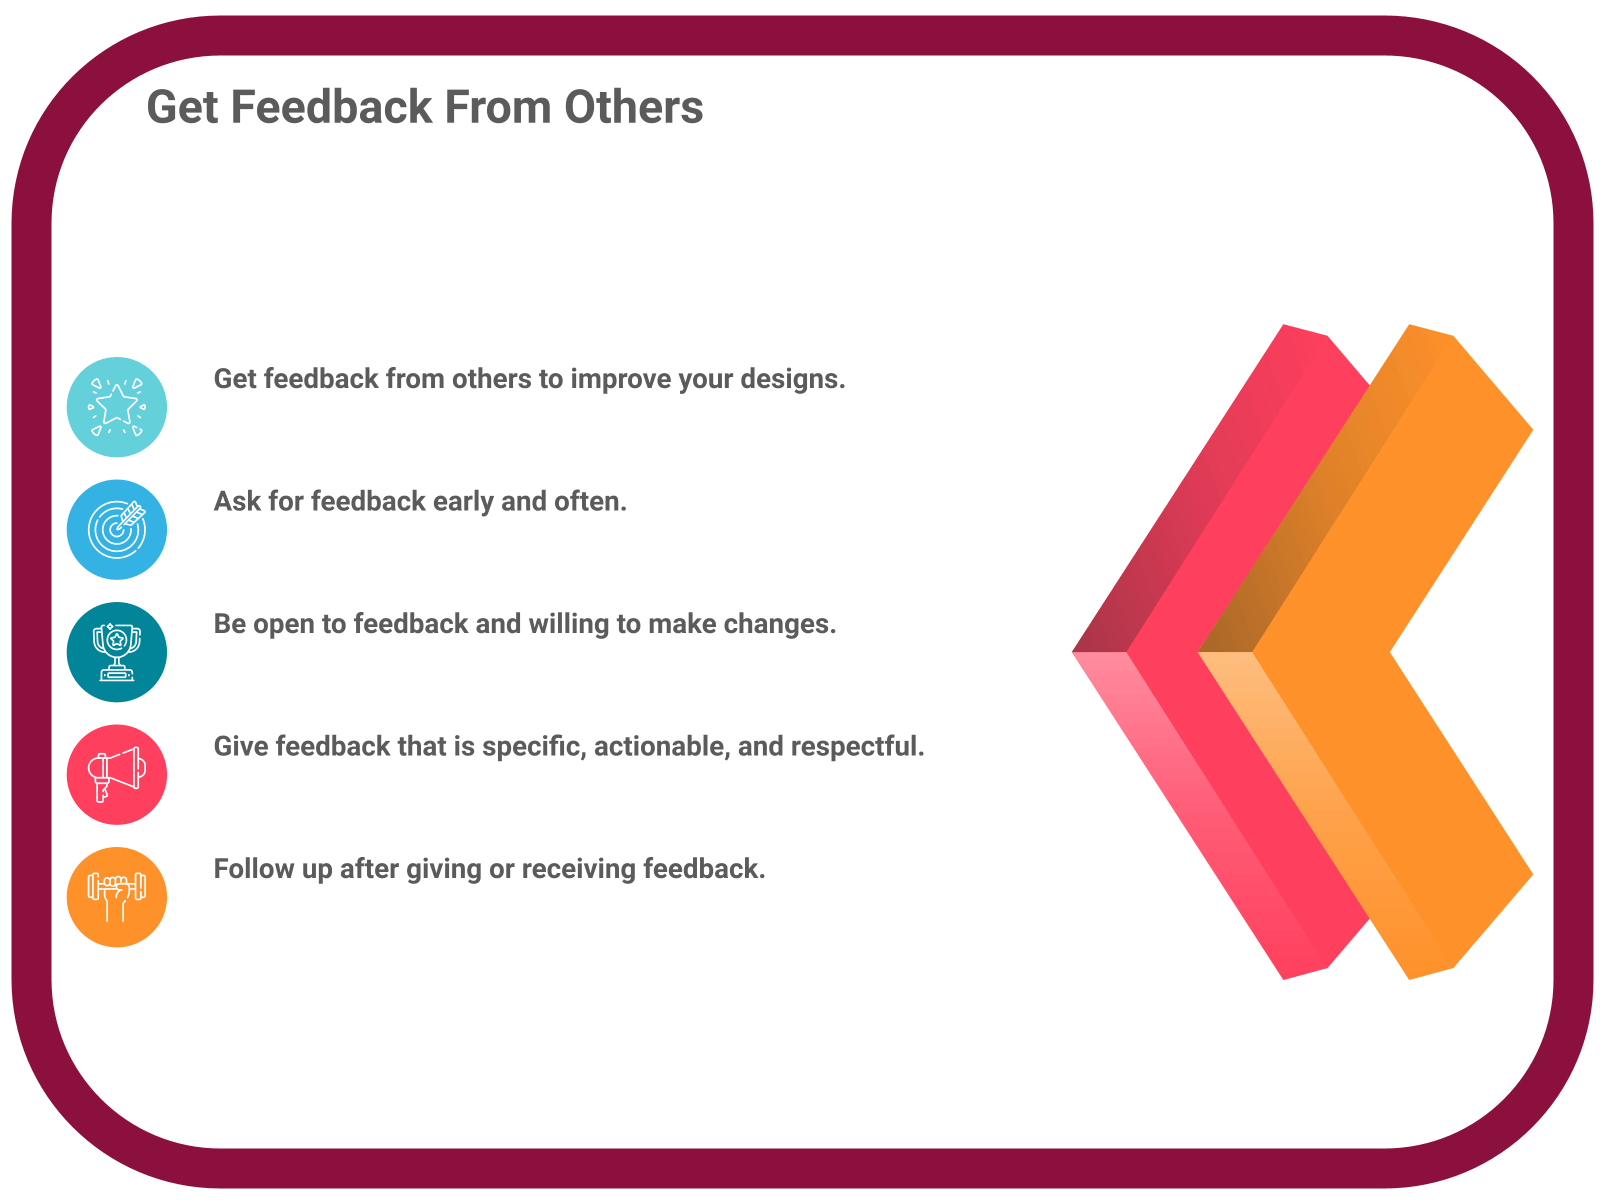 INFOGRAPHIC: Get feedback from others - Poll the People